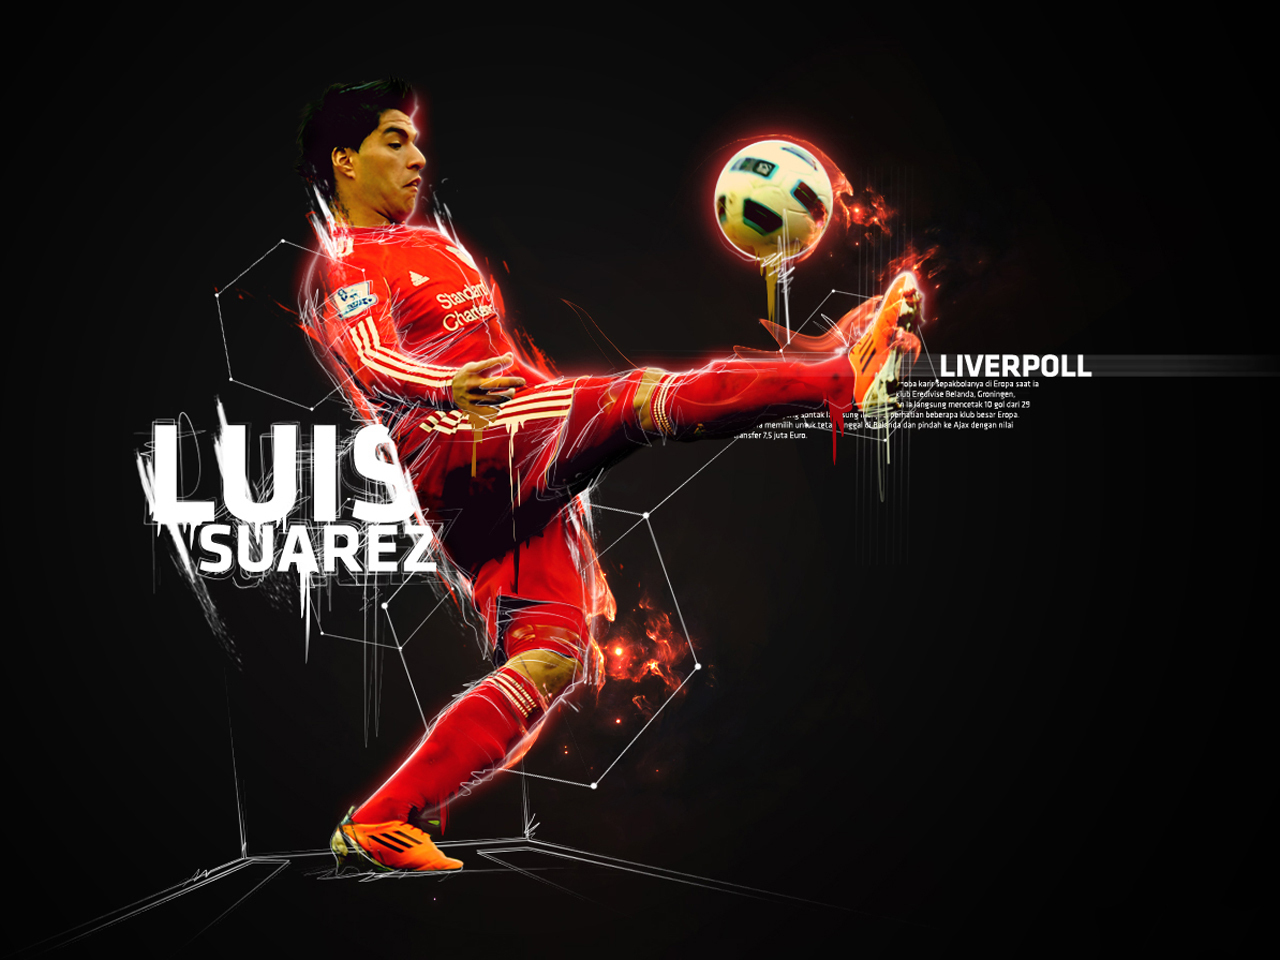 All Football Players: Luis Suarez hd Wallpapers 2012